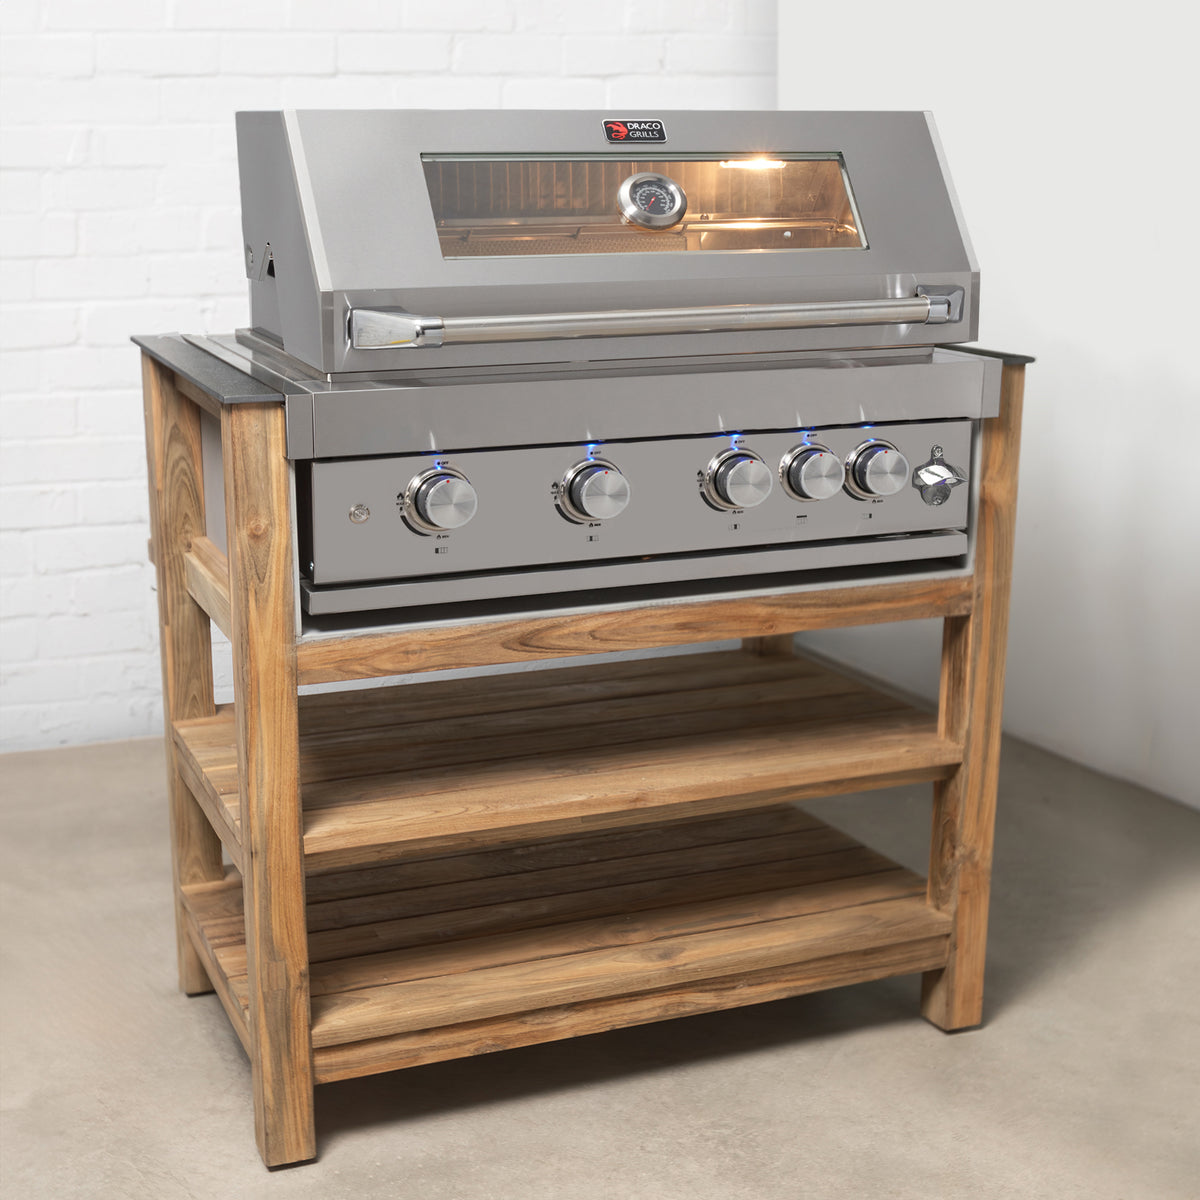 Draco Grills Teak 4 Burner Outdoor Kitchen with Modular Double Cupboard and Double Fridge